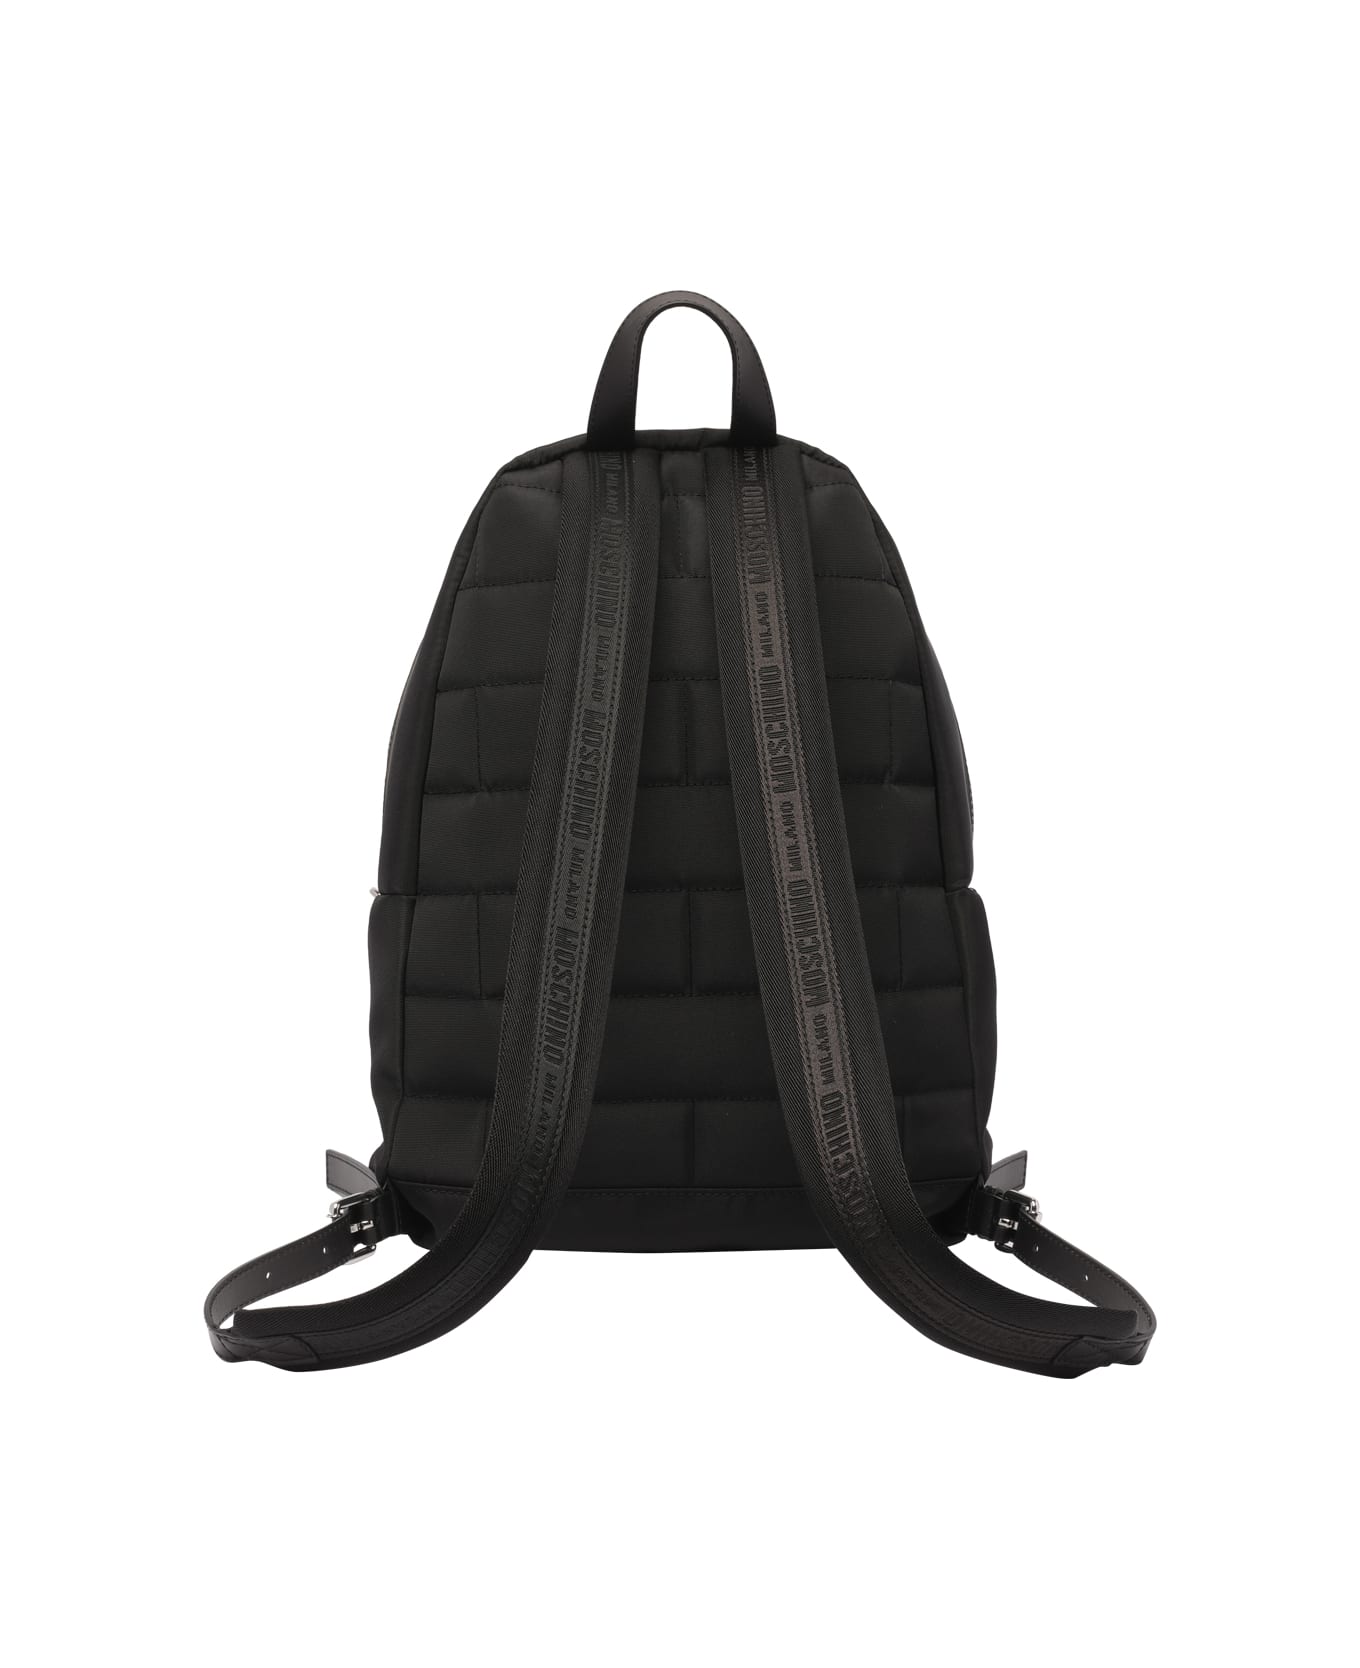 Moschino Couture Backpack - Black バックパック